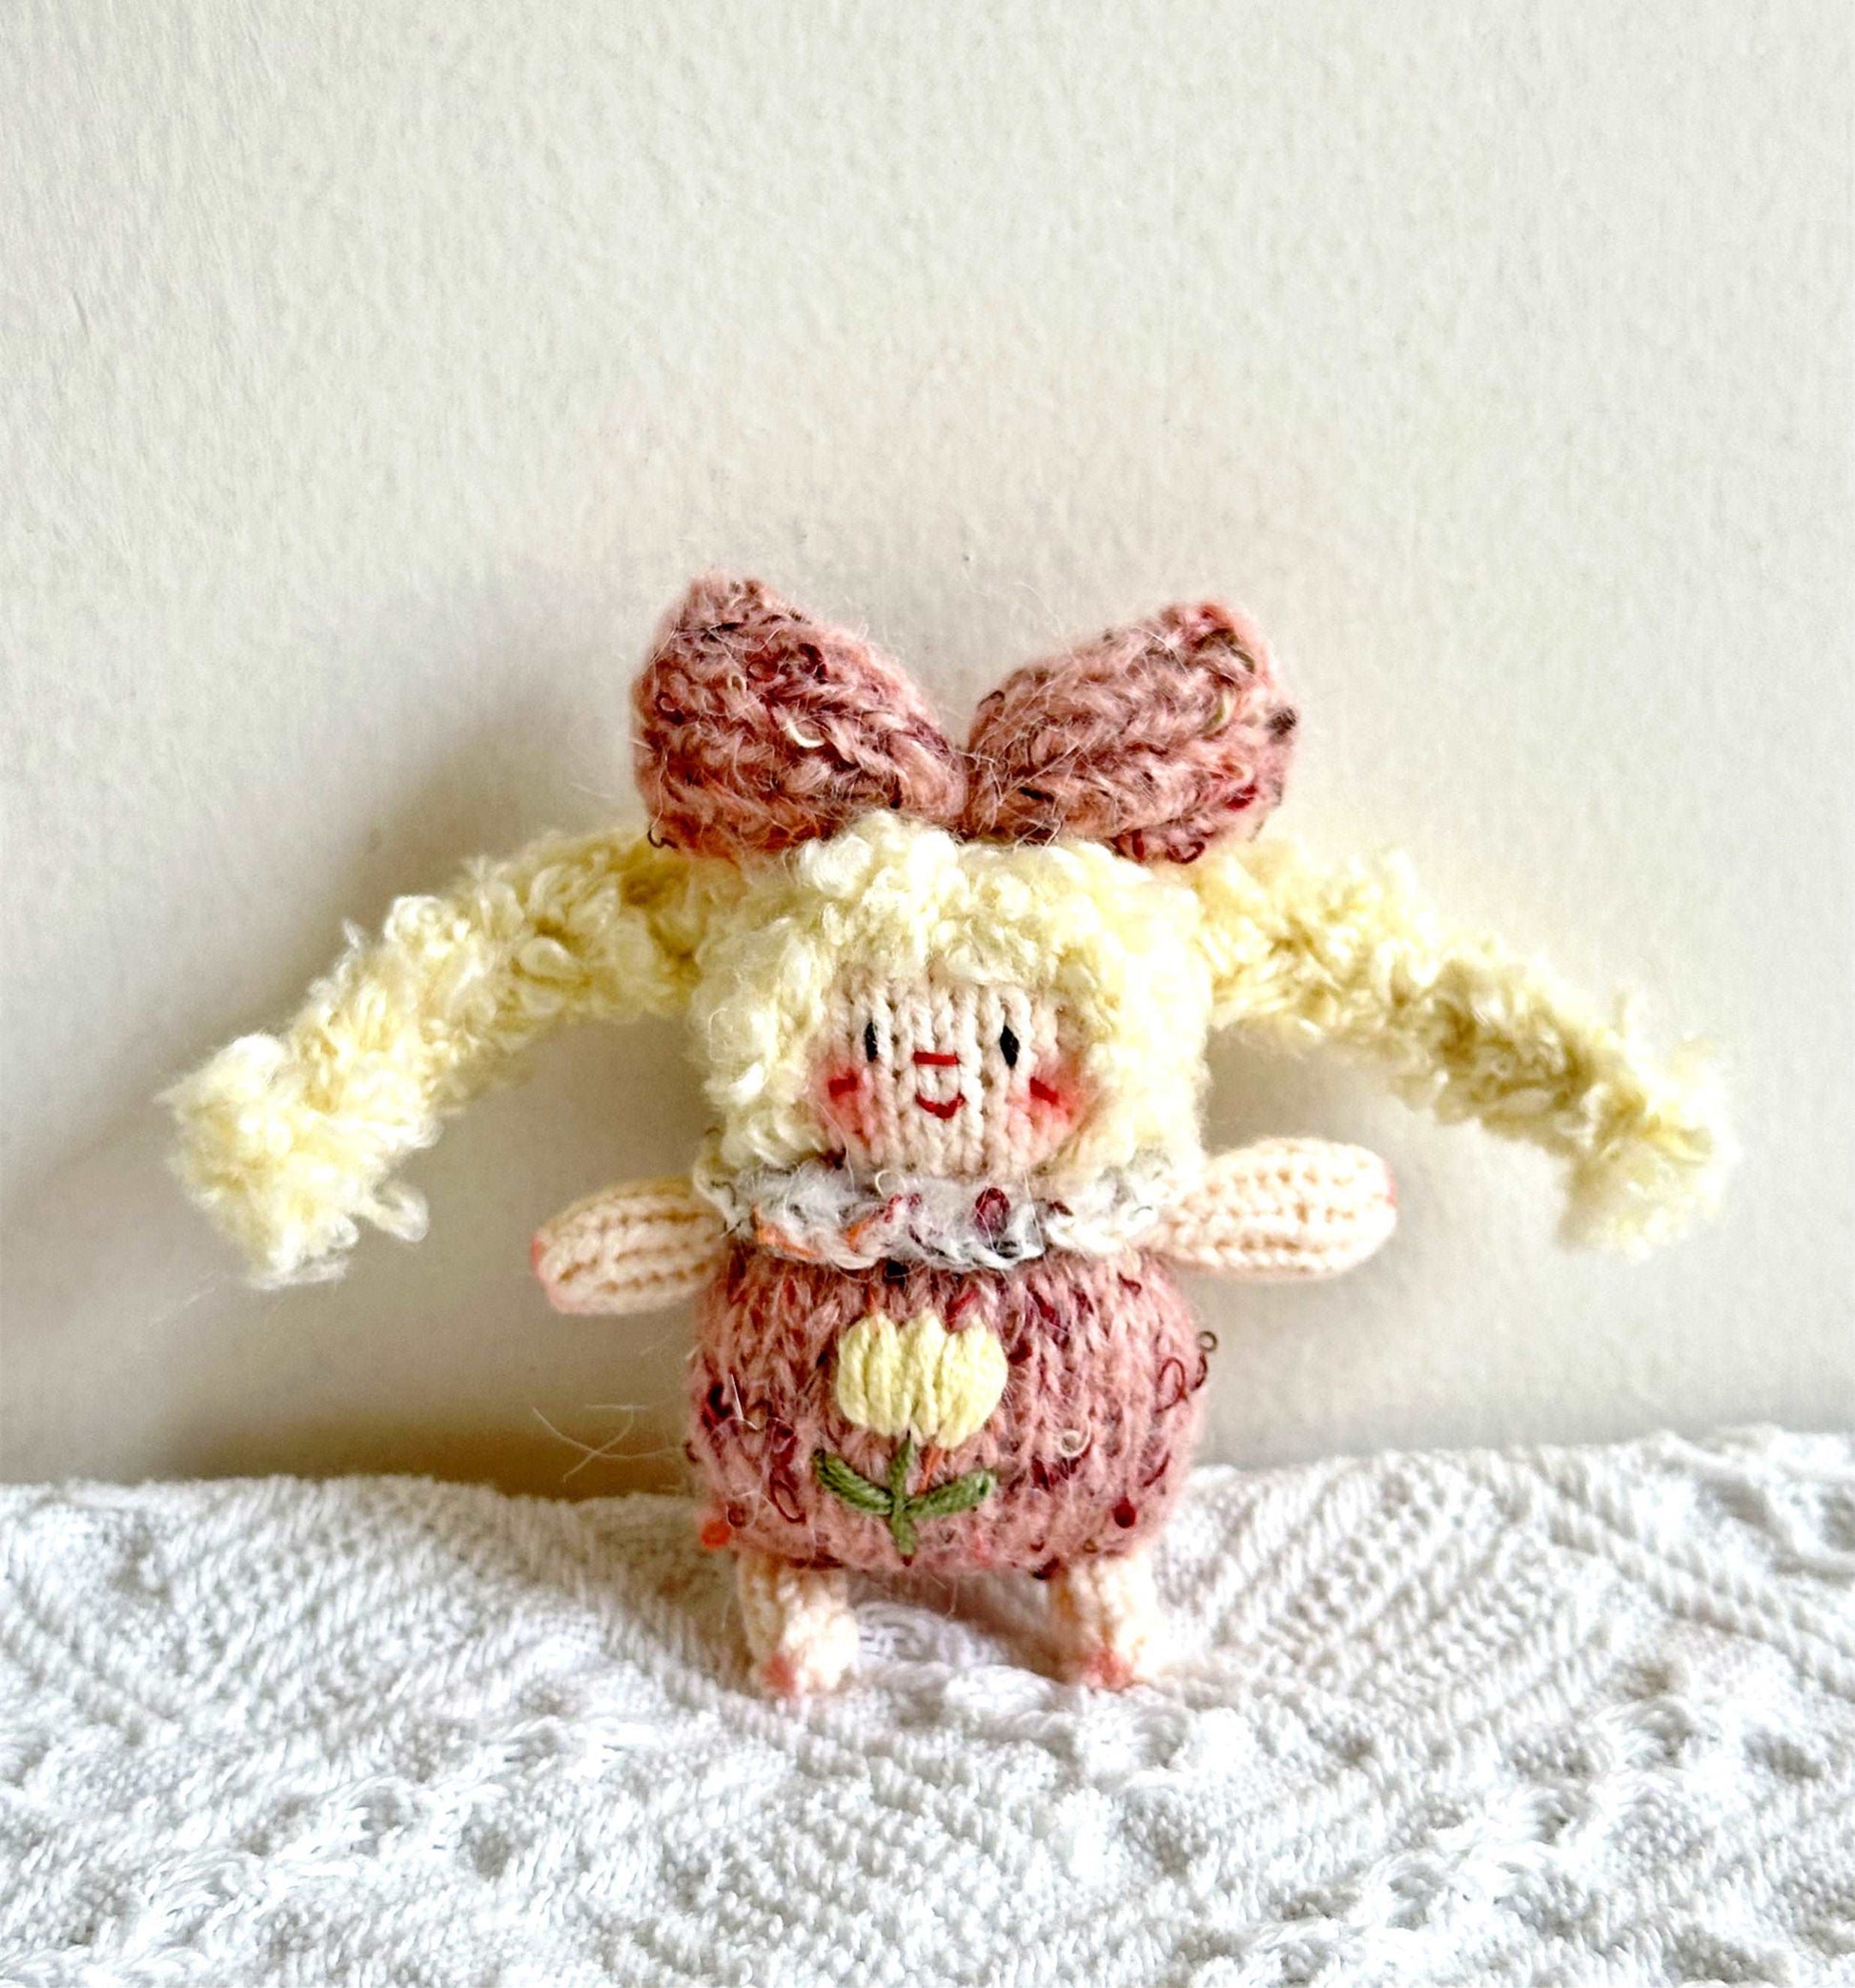 Exquisite Handcrafted Crochet Little Girl Toy Decoration for Nursery Room